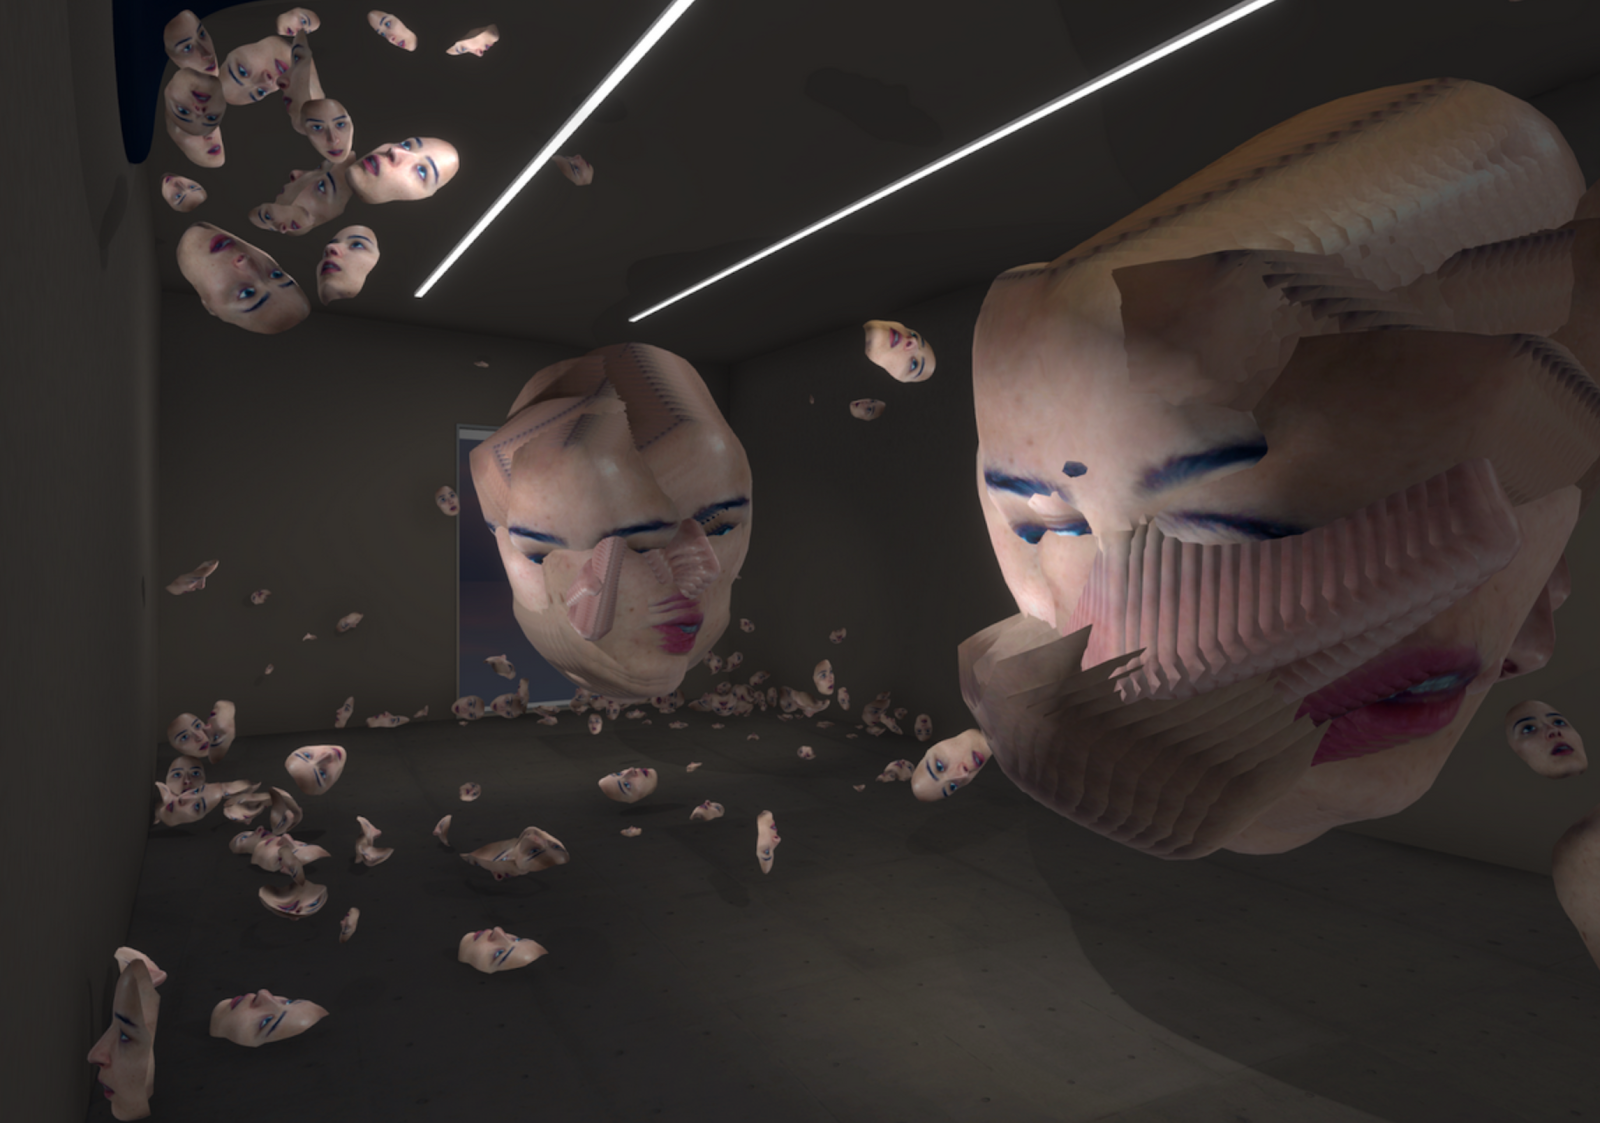 Martina Menegon “heads off me” 2019. Commissioned by Roehrs & Boetsch Gallery for the CUBE - Virtual Gallery for Virtual Art. In-Game view © Photo courtesy of the artist